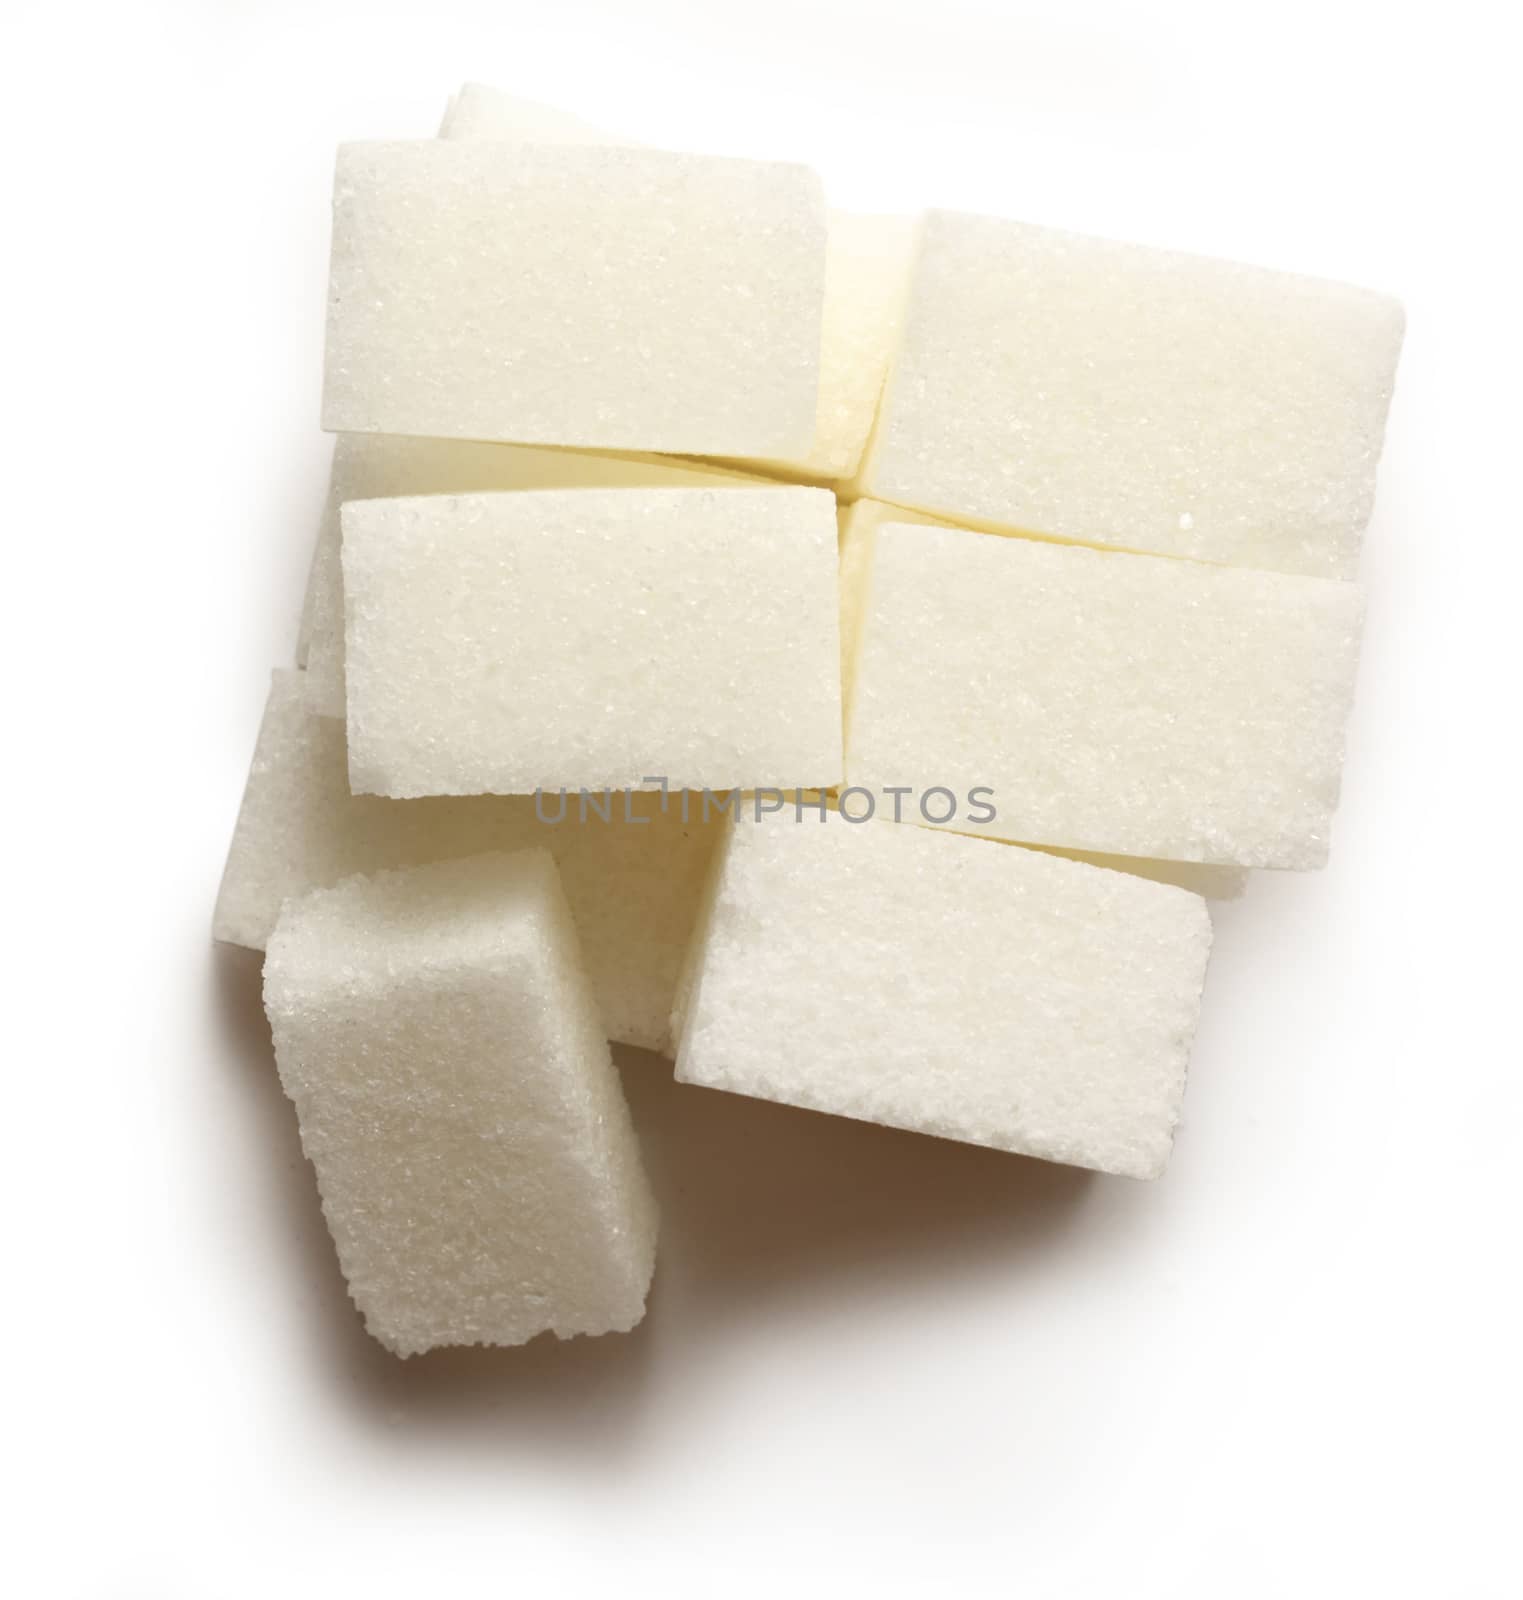 Sugar cubes on the white background